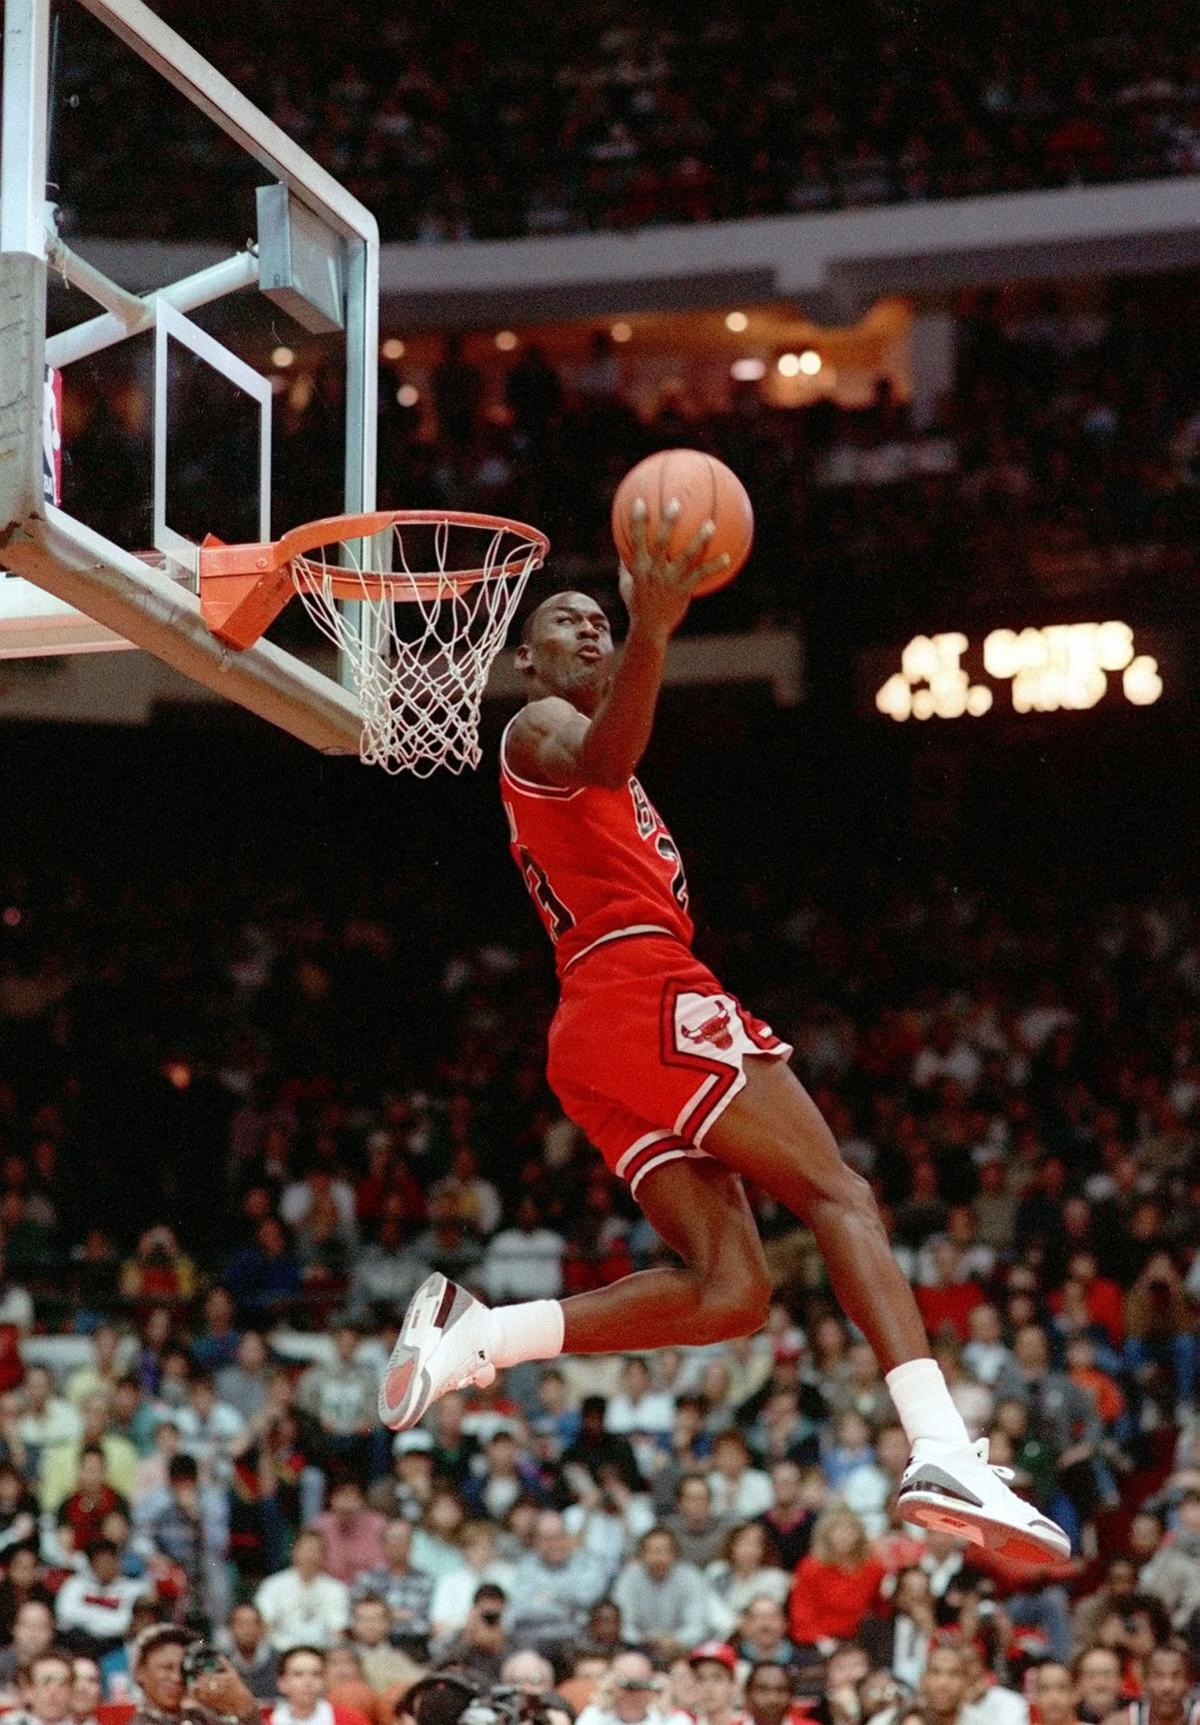 New Nikes Pay Homage to Scottie Pippen's Dunk Over Patrick Ewing